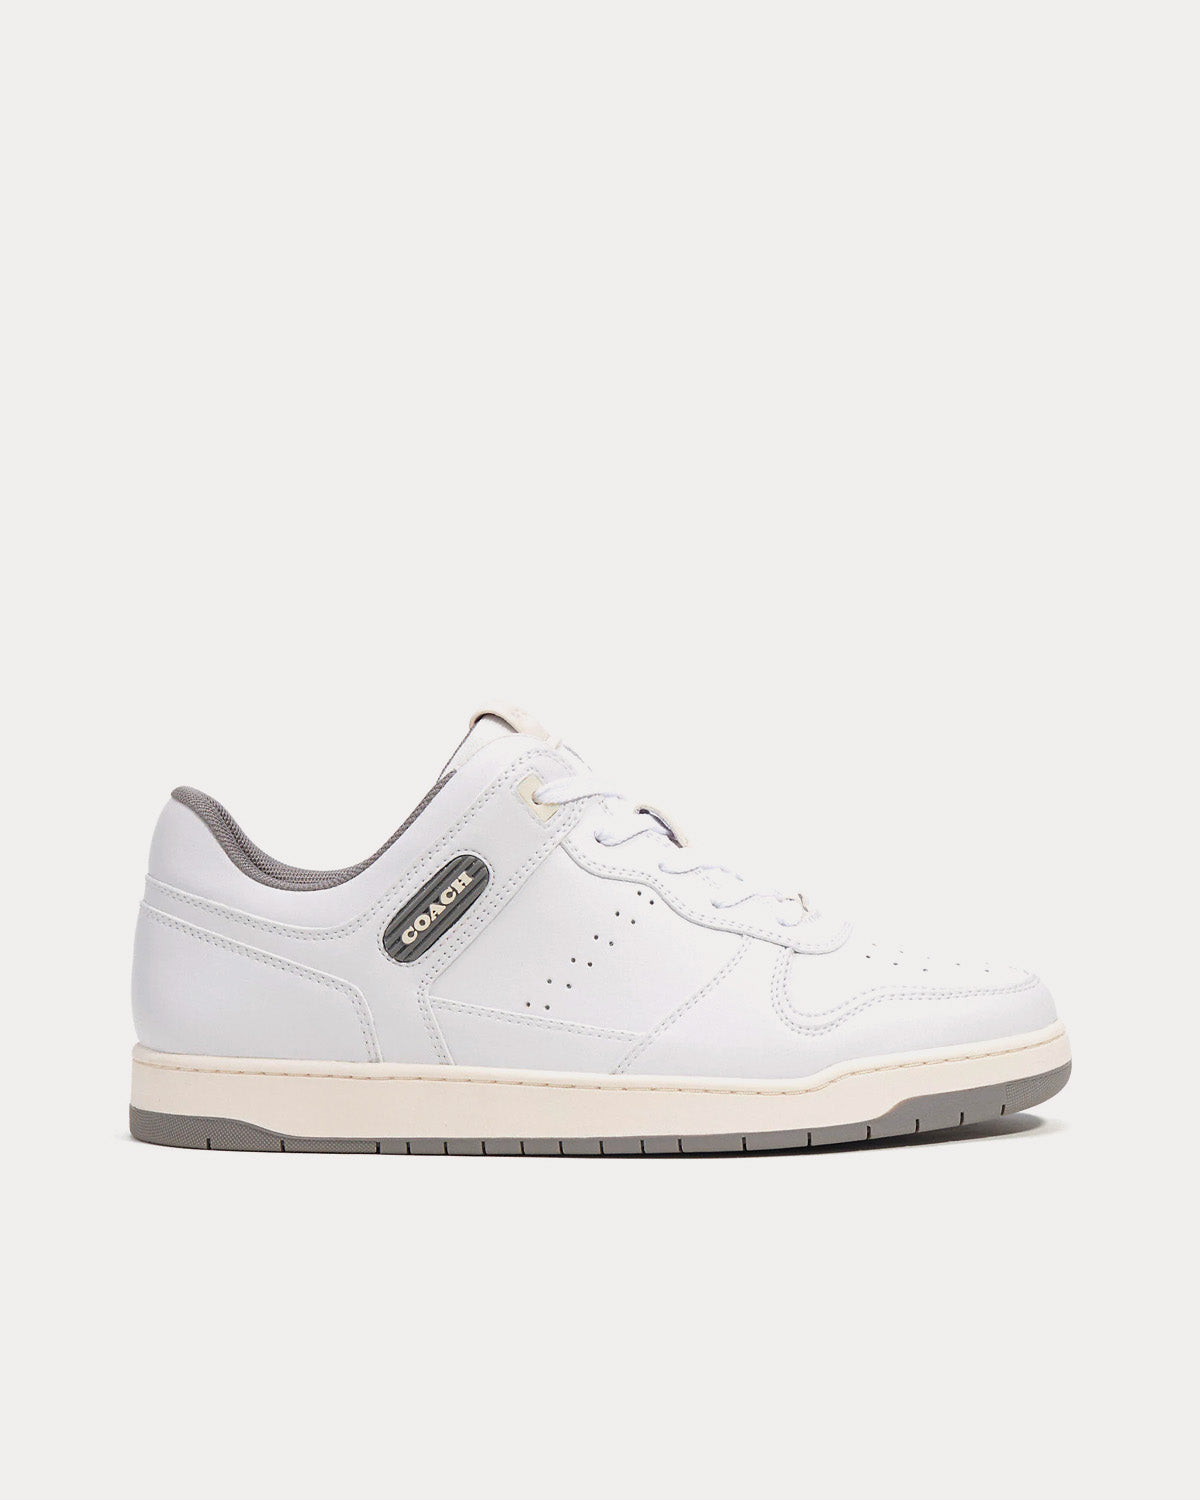 Coach - C201 Optic White / Heather Grey Low Top Sneakers